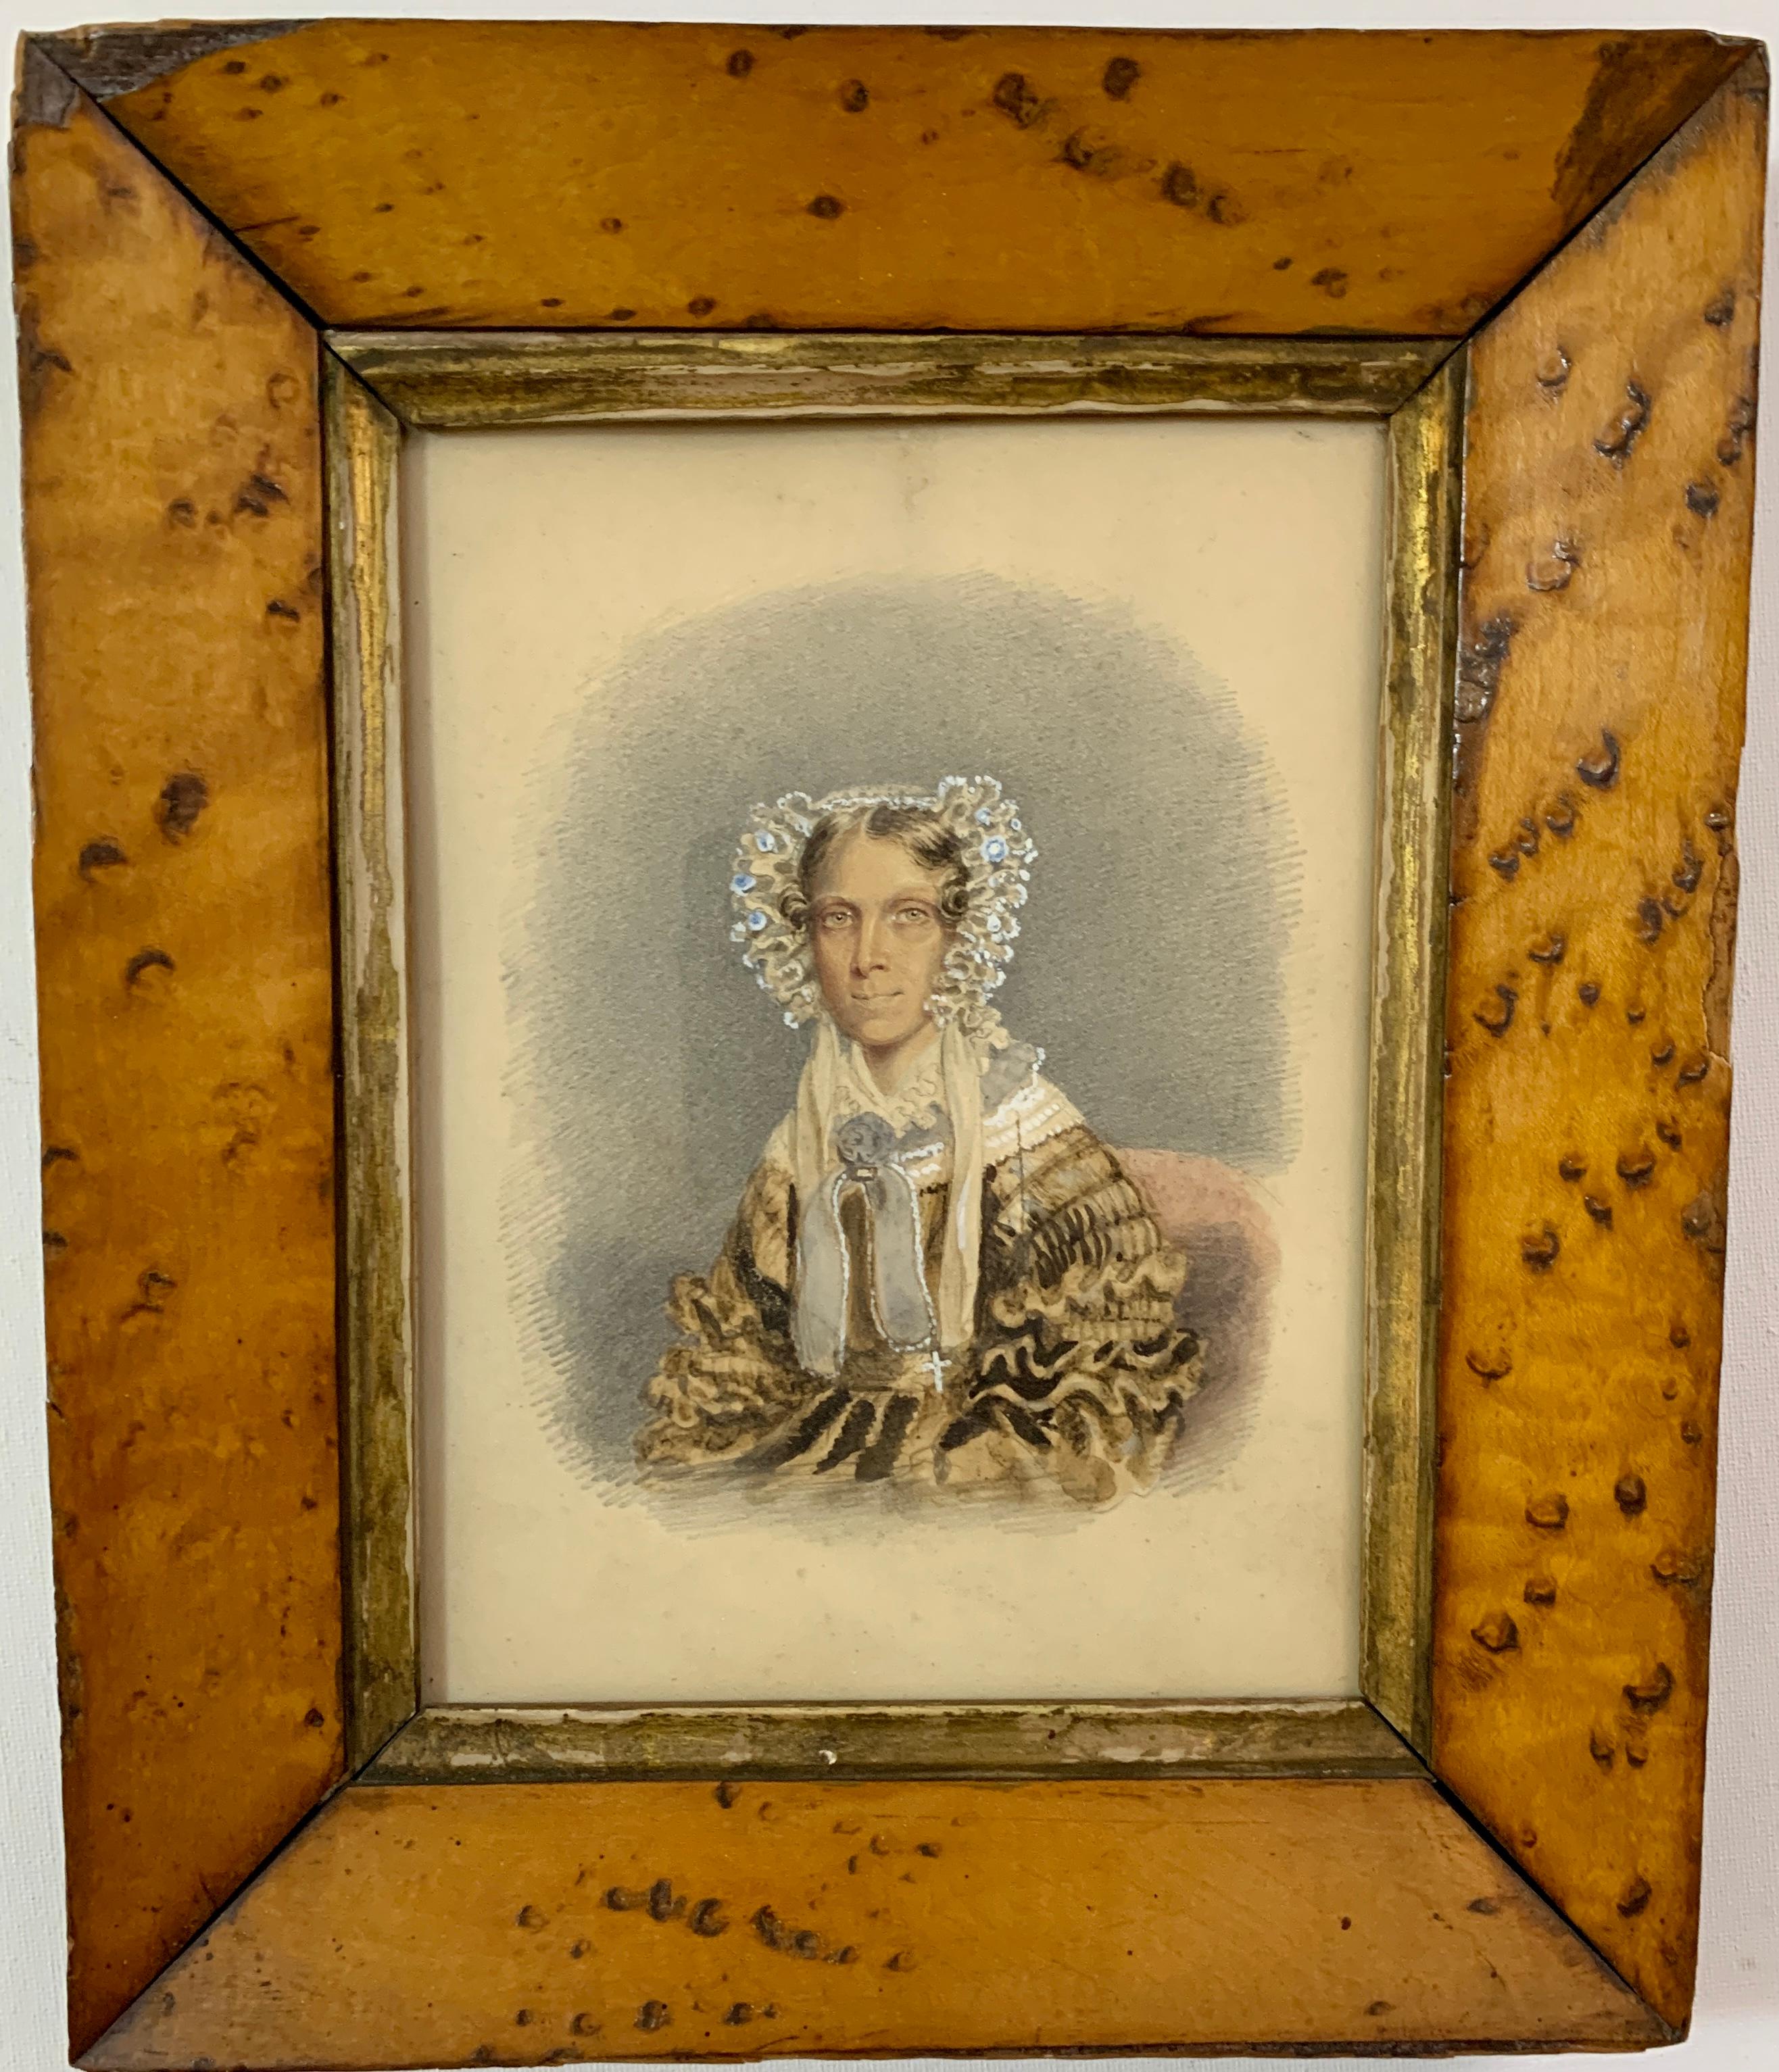 A pair pf 19th century English School watercolor portraits of a man and woman, possibly husband and wife. 

Both are inscribed on the reverse with Im sure some history of the sitters or their family.

Both are framed in their original hand made